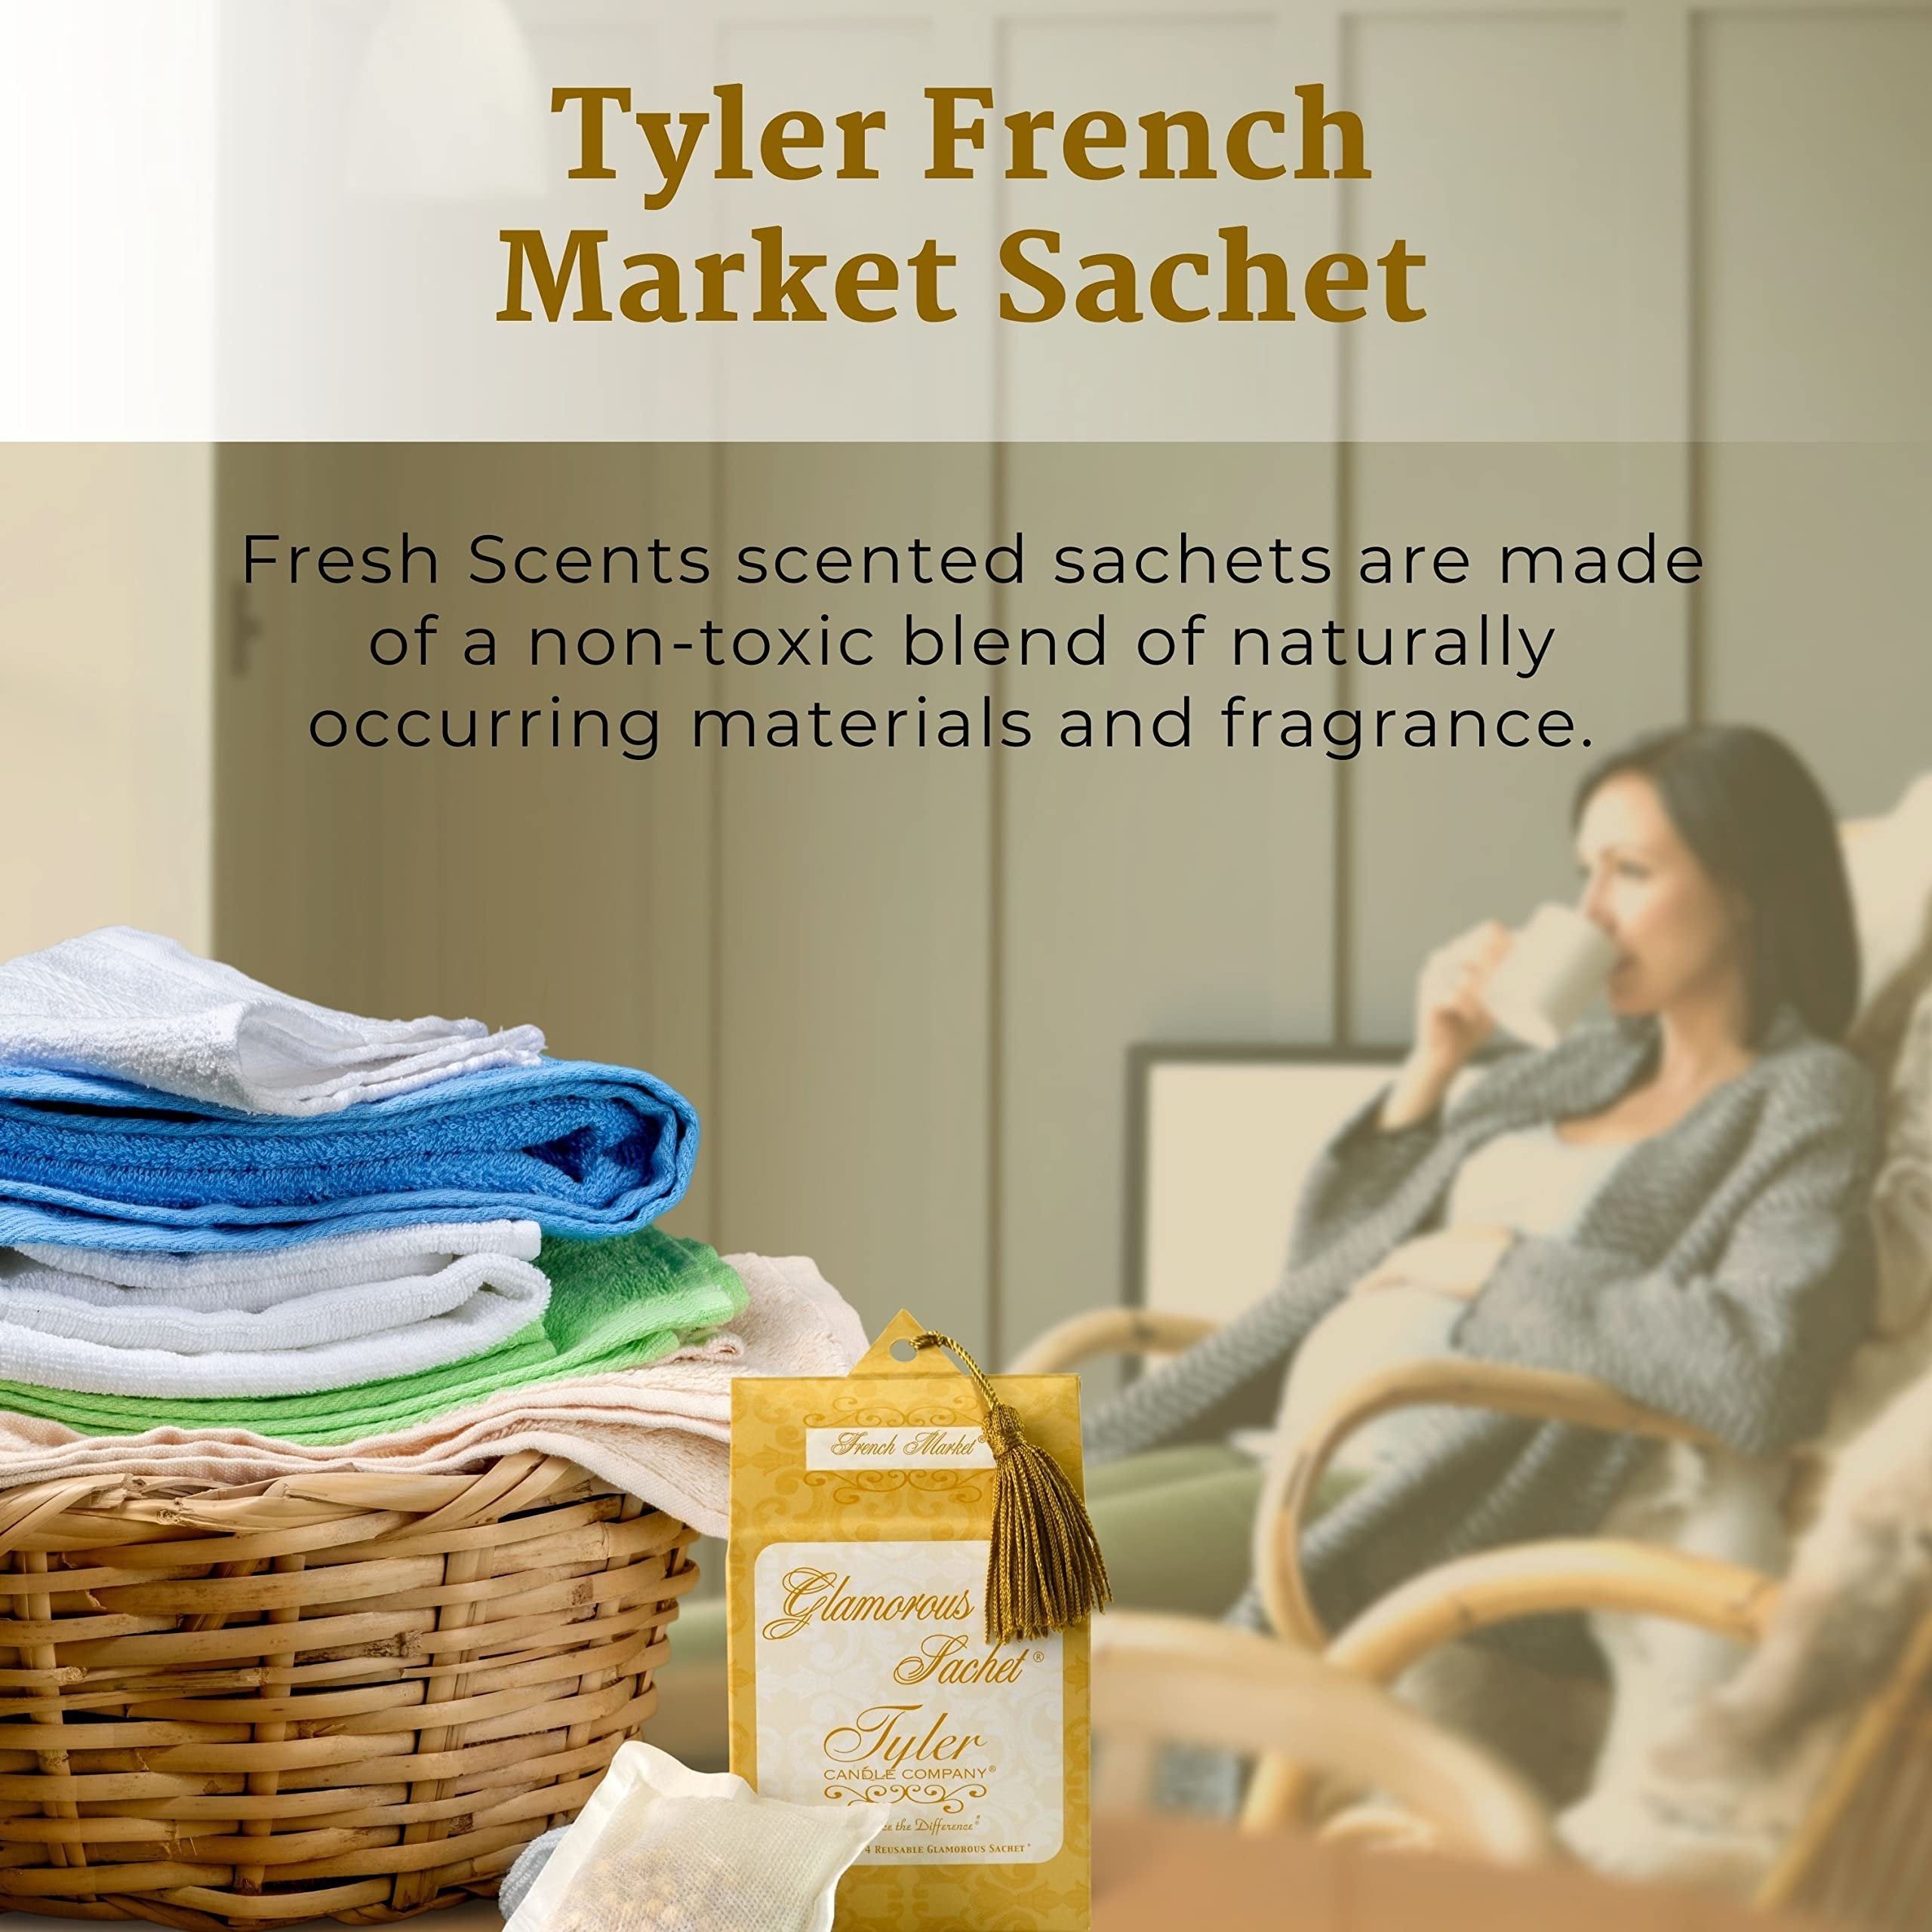 Tyler Candle Company French Market Dryer Sheet Sachets - Glamorous Reusable Dryer Sheets - Sachets for Drawers and Closets - 1 Pack, 4 Sachets, Dryer, Home, or Personal Sachet, with Bonus Key Chain